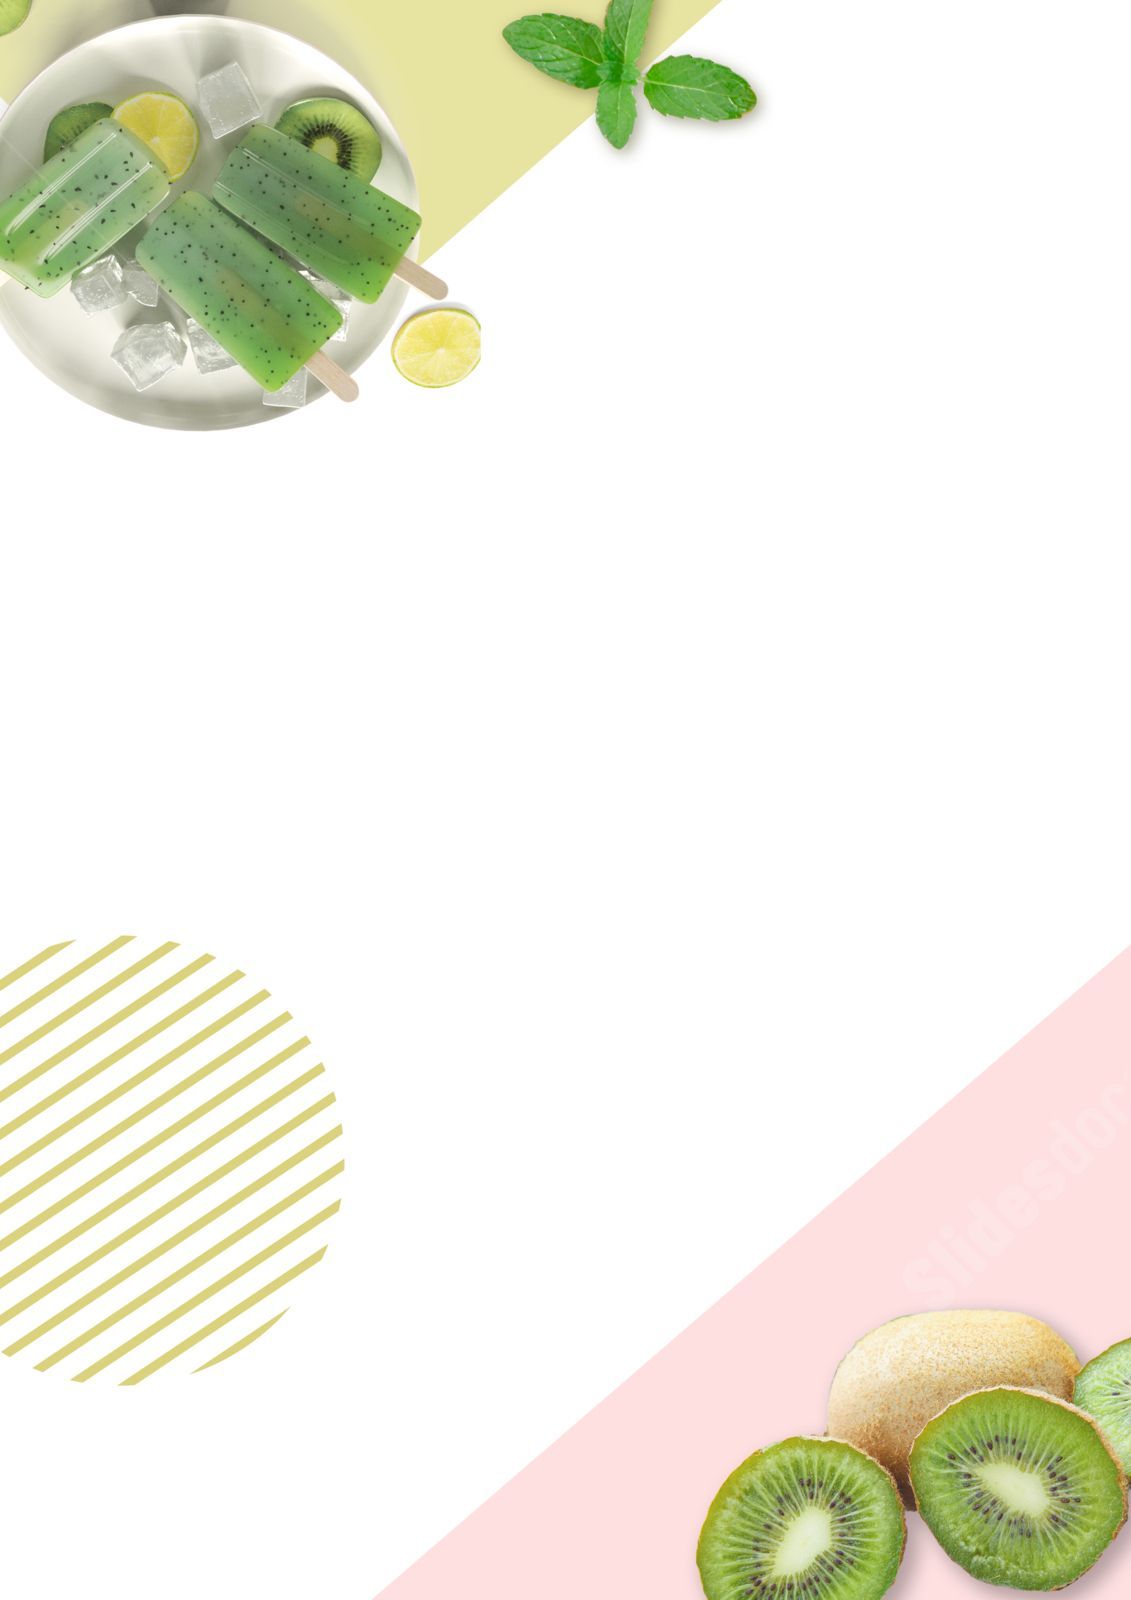 Ice Cream Made With Green Kiwi Fruit Page Border Background Word And Google Docs For Free Download